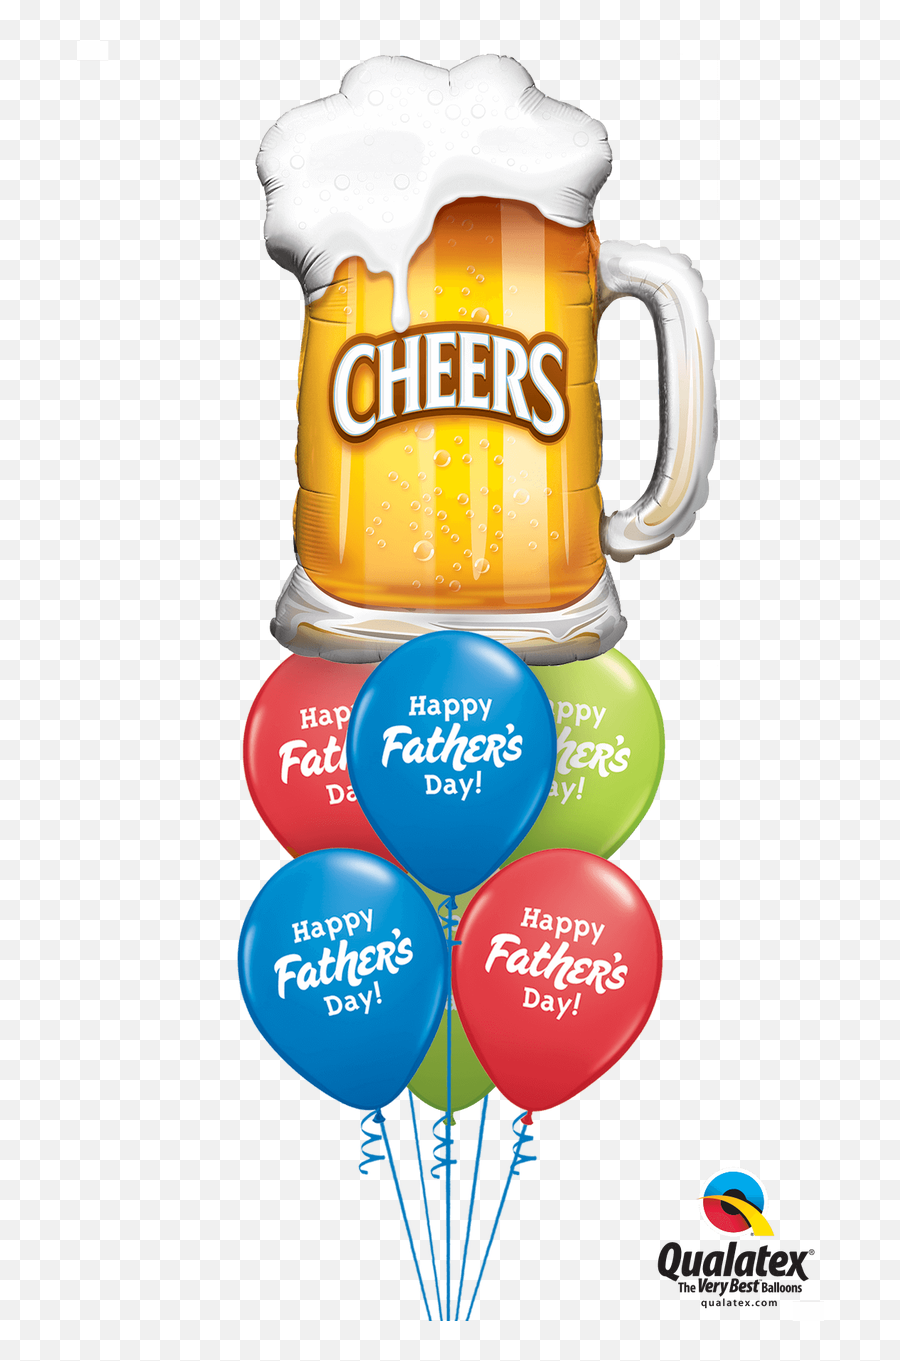 Fathers Day Balloon Bouquet Sydney - Day Cheers Emoji,Father,s Day Emojis